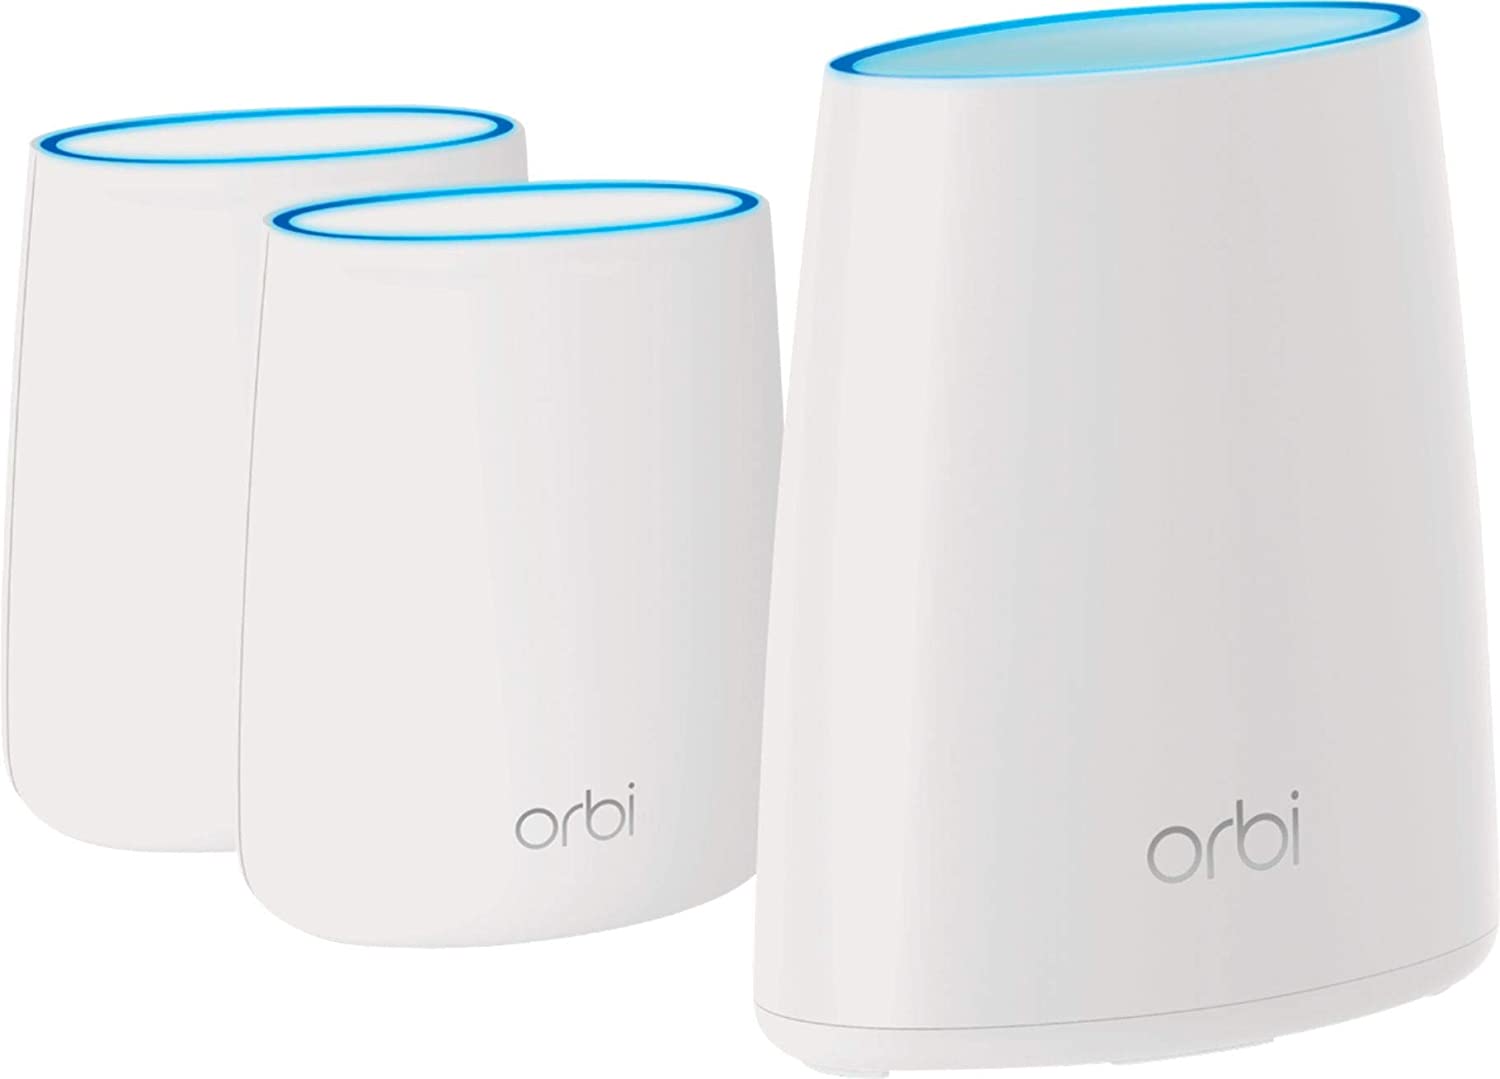 3-Pack Netgear Orbi AC2200 Tri-Band Whole Home Mesh WiFi System (RBK43S) $250 + Free Shipping